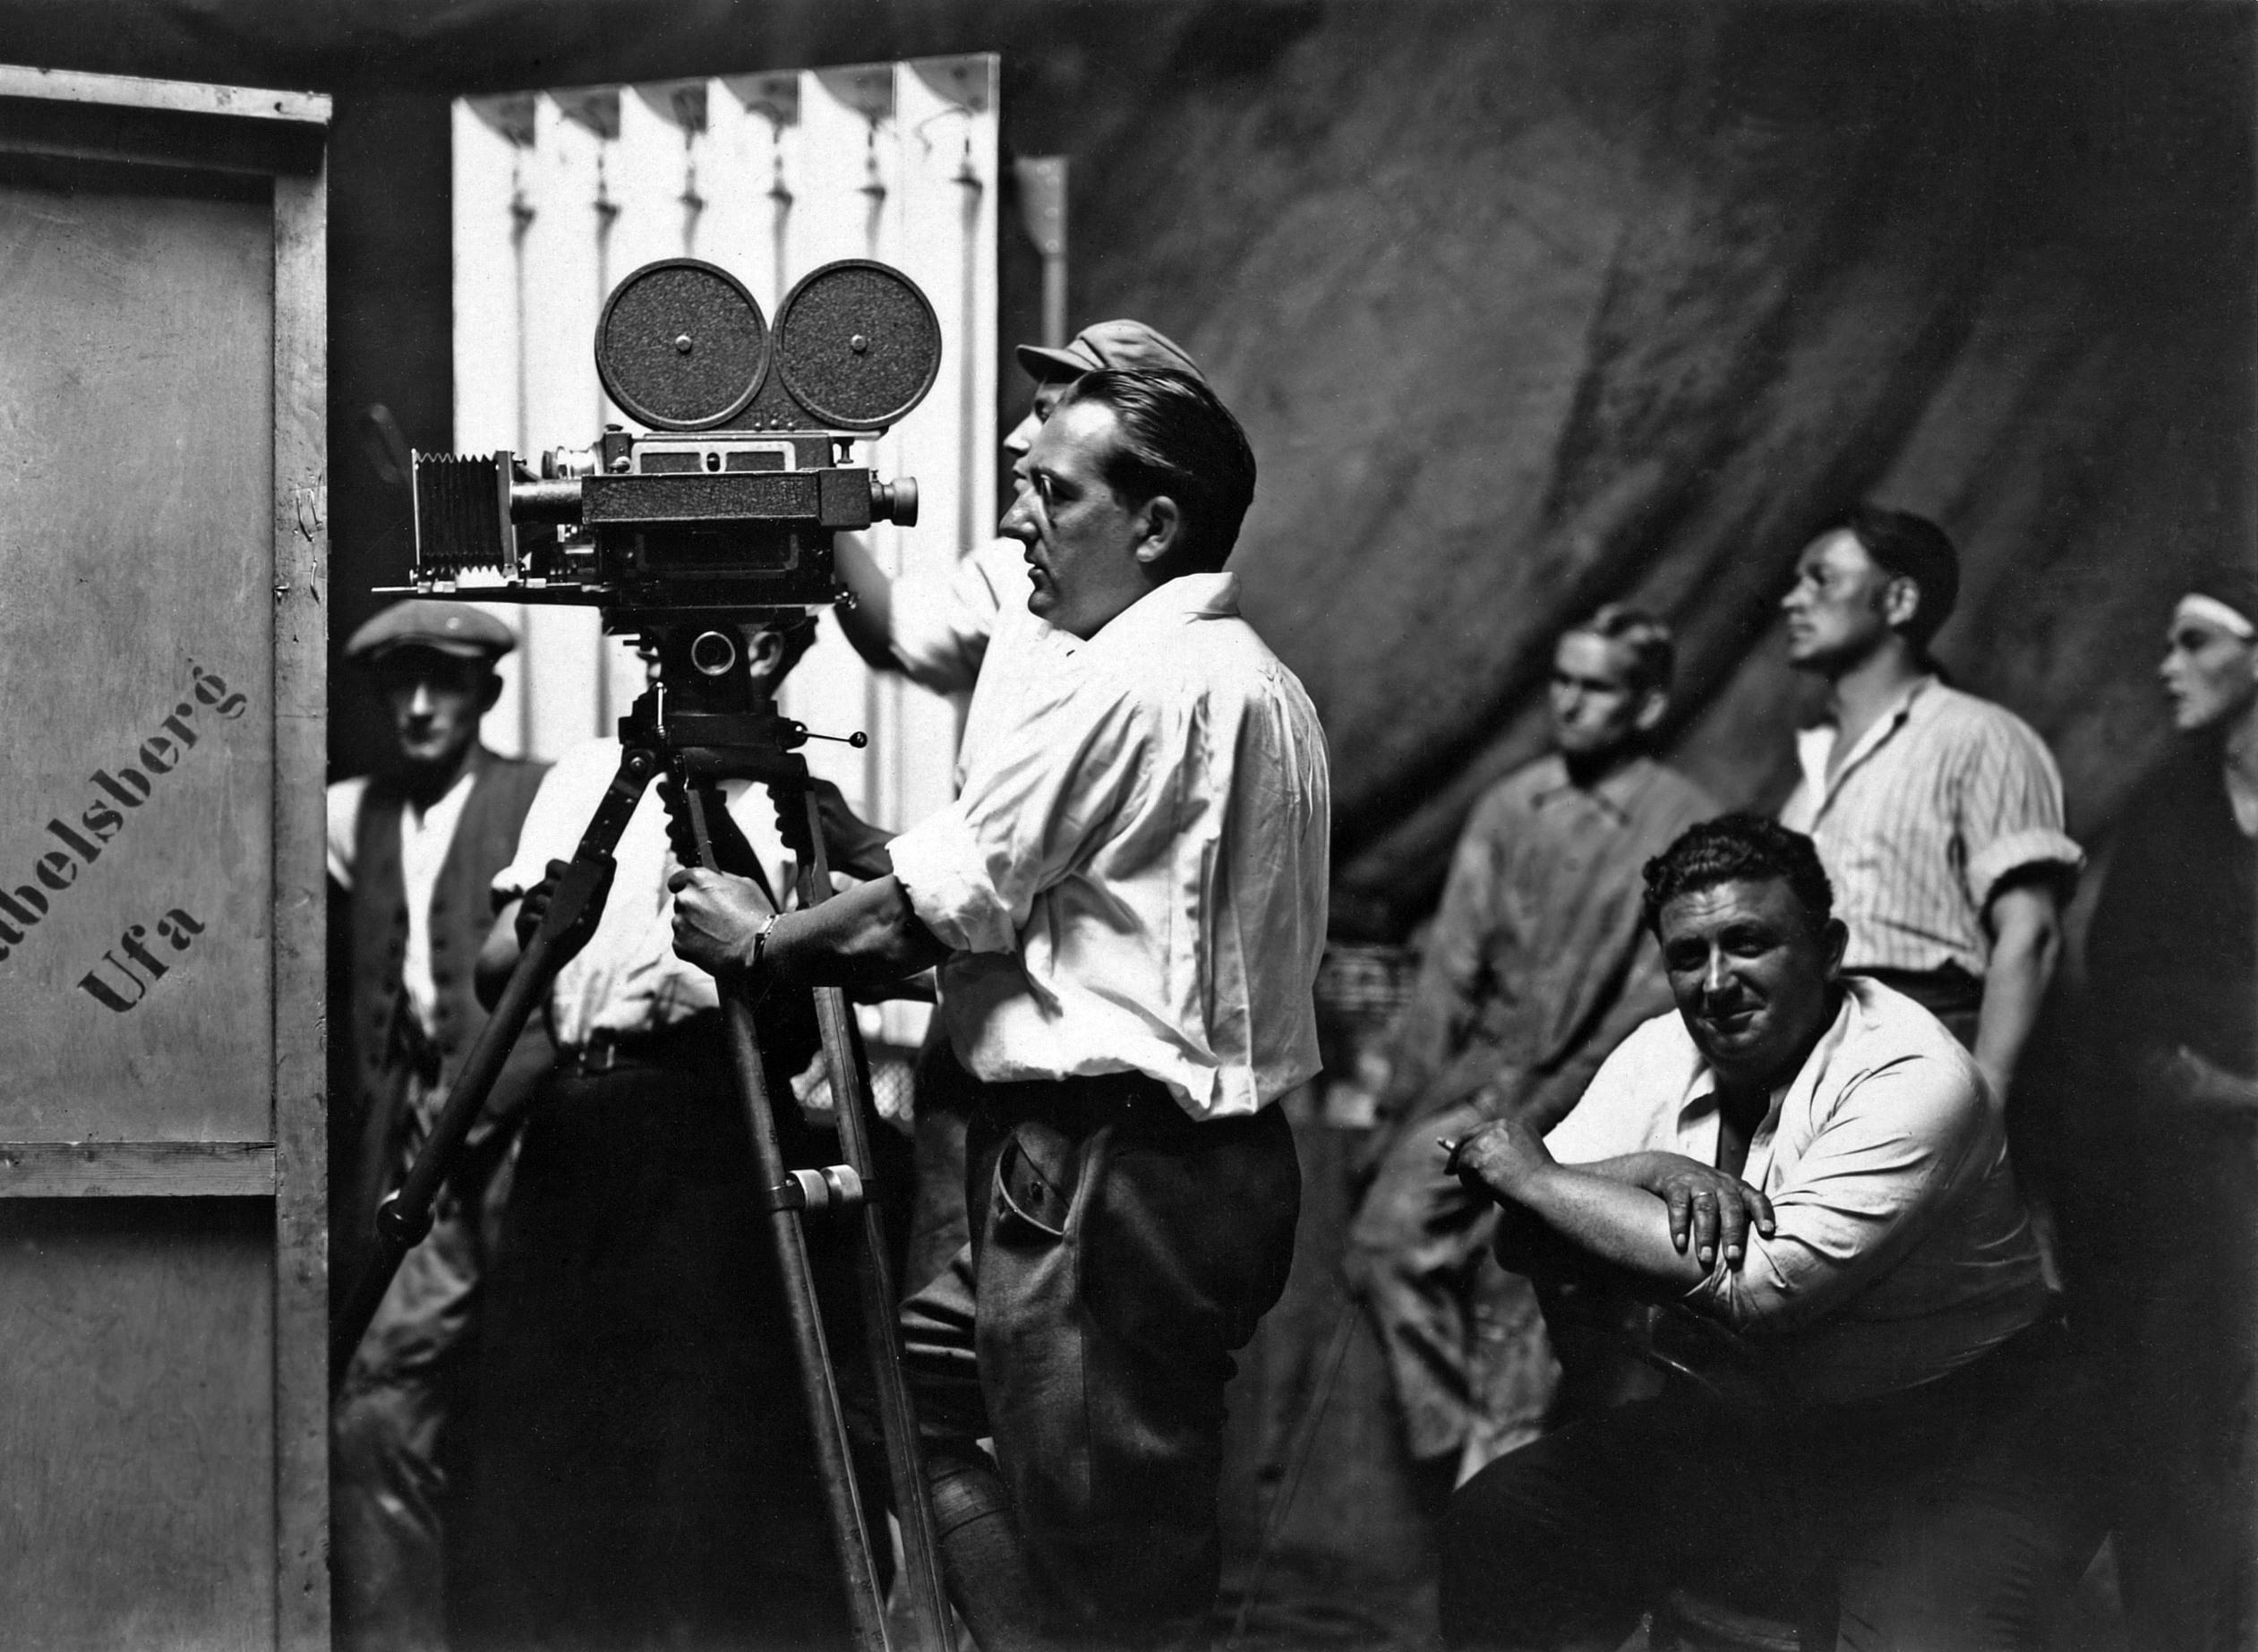 Behind the scenes of the film Metropolis (Germany 1927, directed by Fritz Lang)